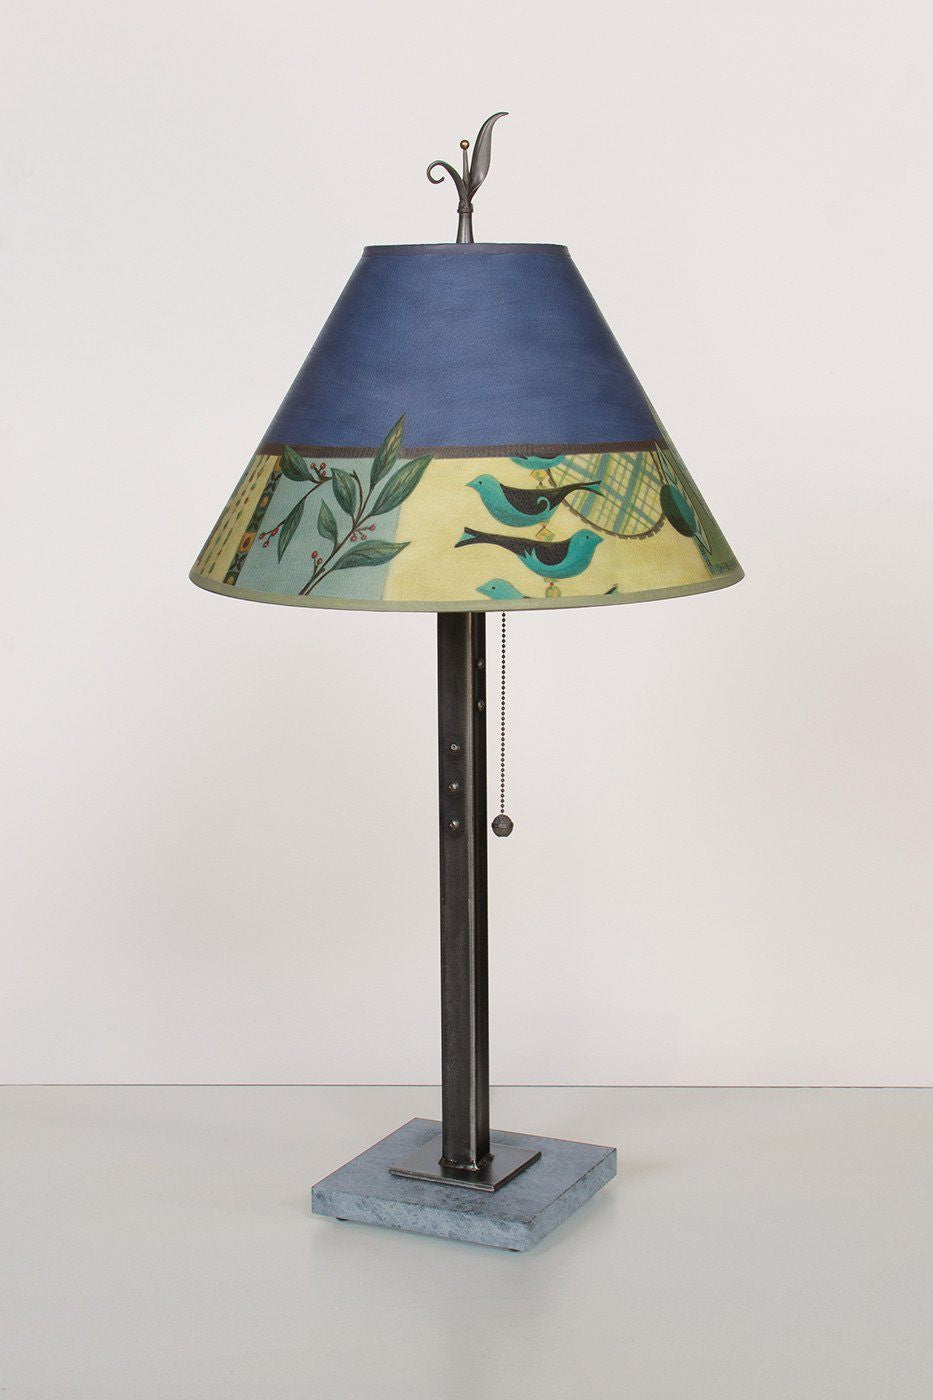 Janna Ugone &amp; Co Table Lamps Steel Table Lamp with Medium Conical Shade in New Capri Periwinkle